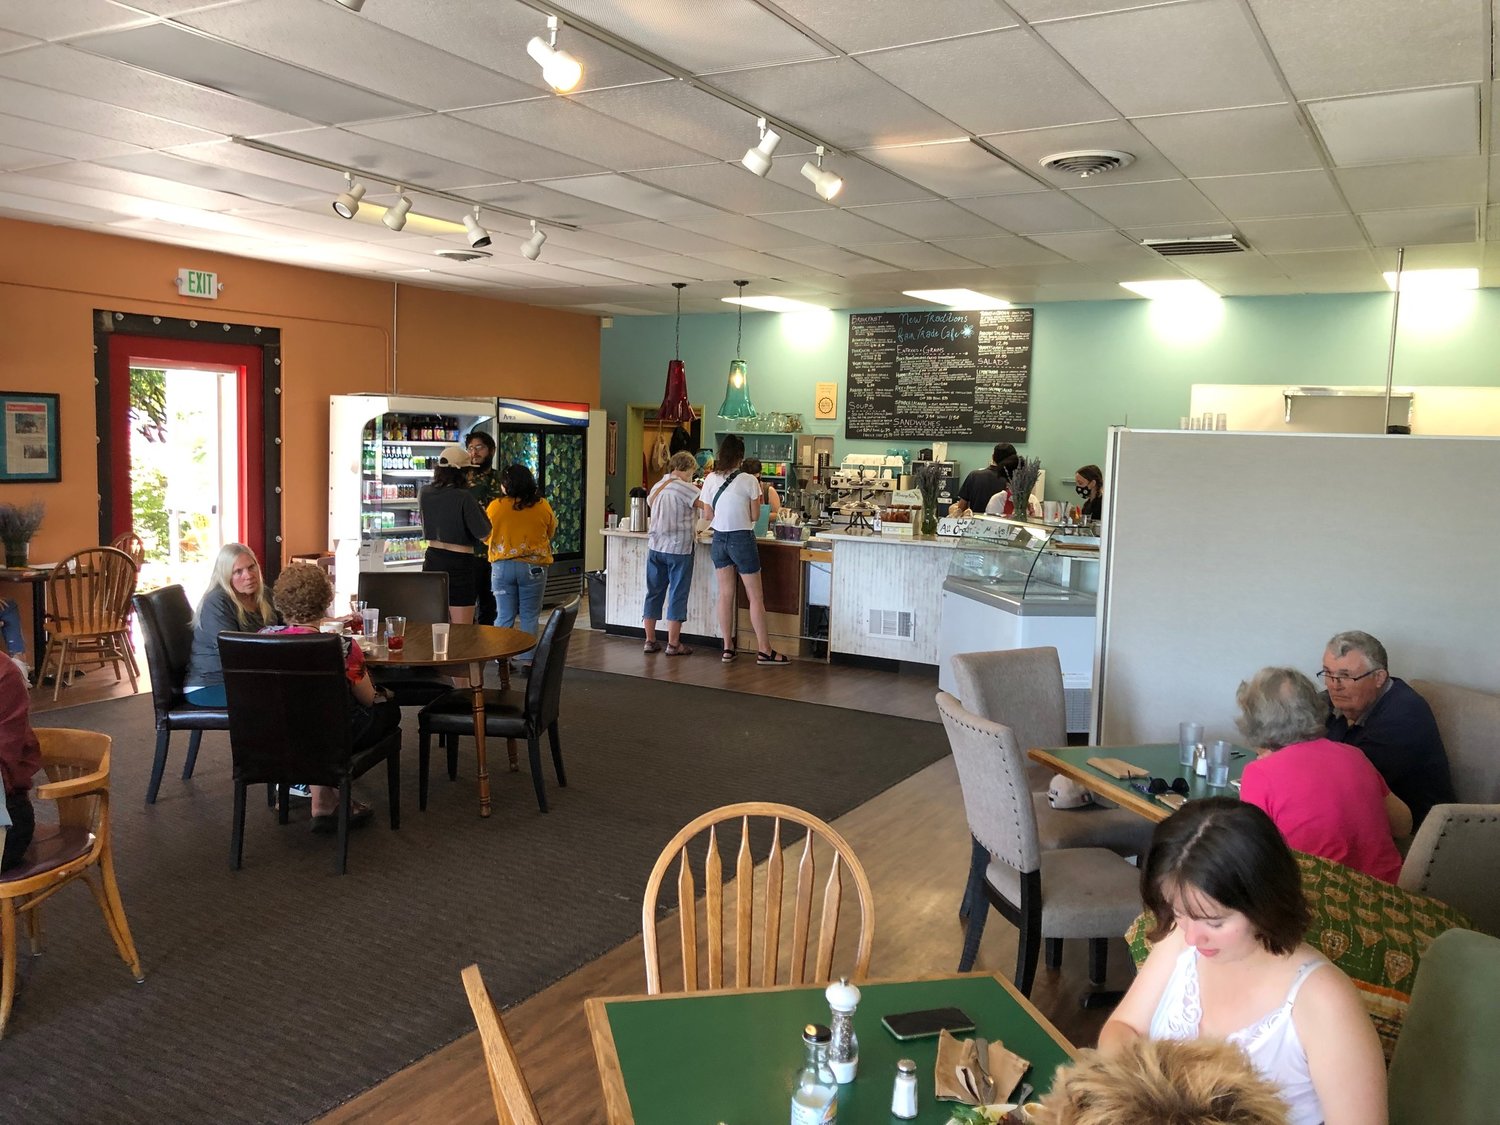 With a new paint job and door to the new covered patio, New Traditions Cafe is much brighter than before its 2021remodel.